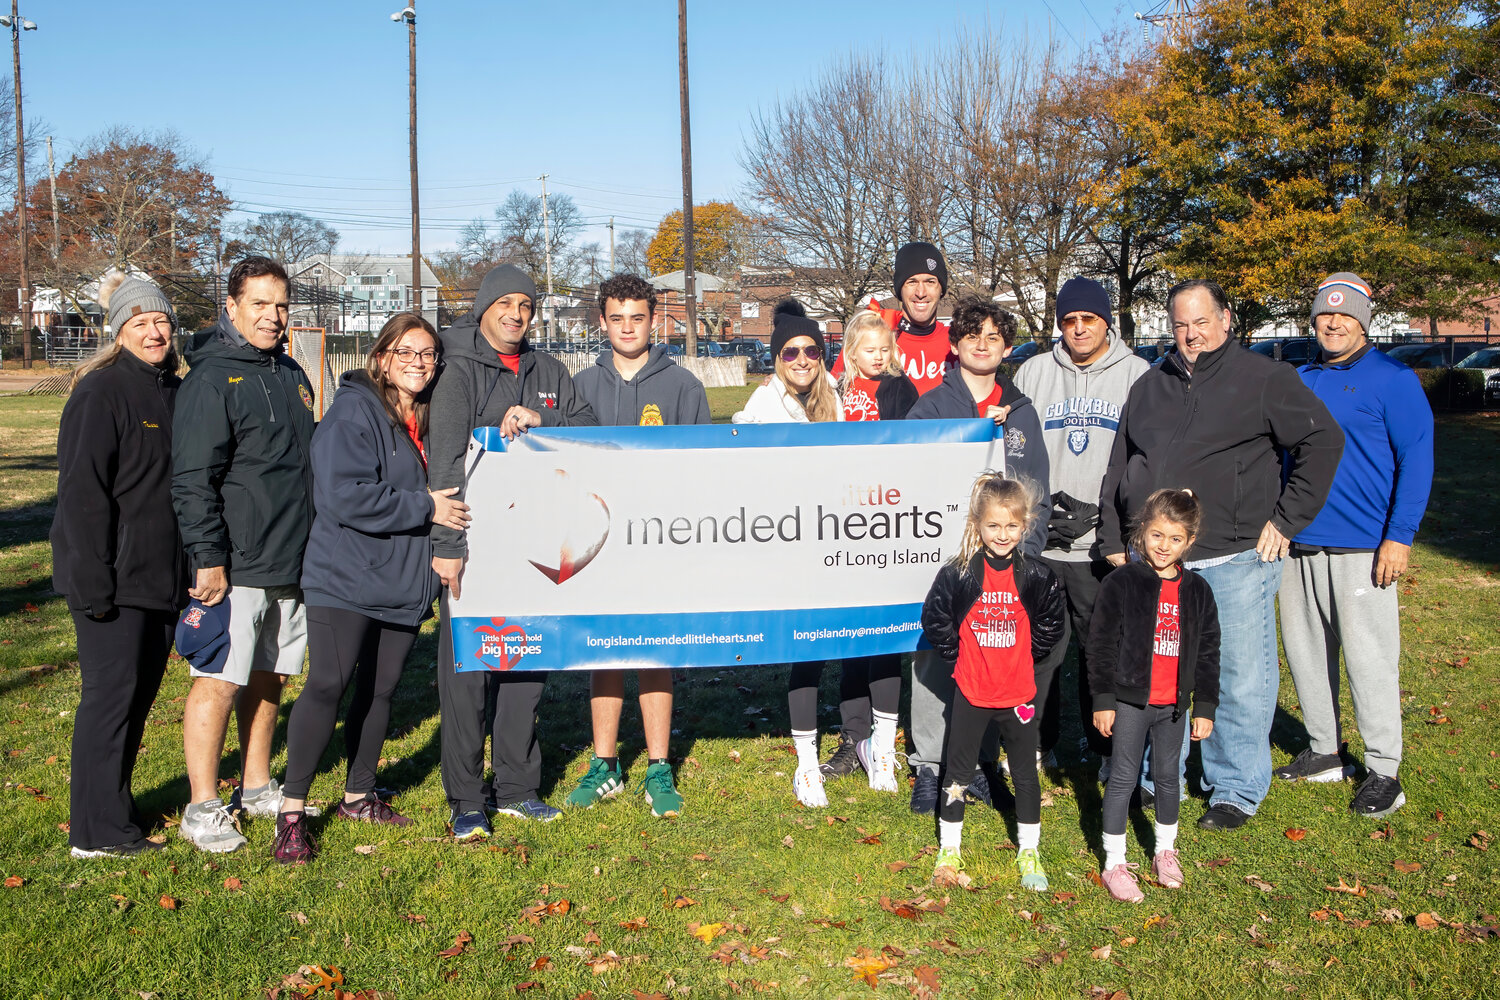 The 5k race on Thanksgiving Day was in support of Mended Little Hearts of Long Island, an organization that provides resources to children and families impacted by congenital heart defects, which are the most common birth defects in the country. The organization will use the proceeds from the race to benefit pediatric cardiology patients at New York Presbyterian Hospital.